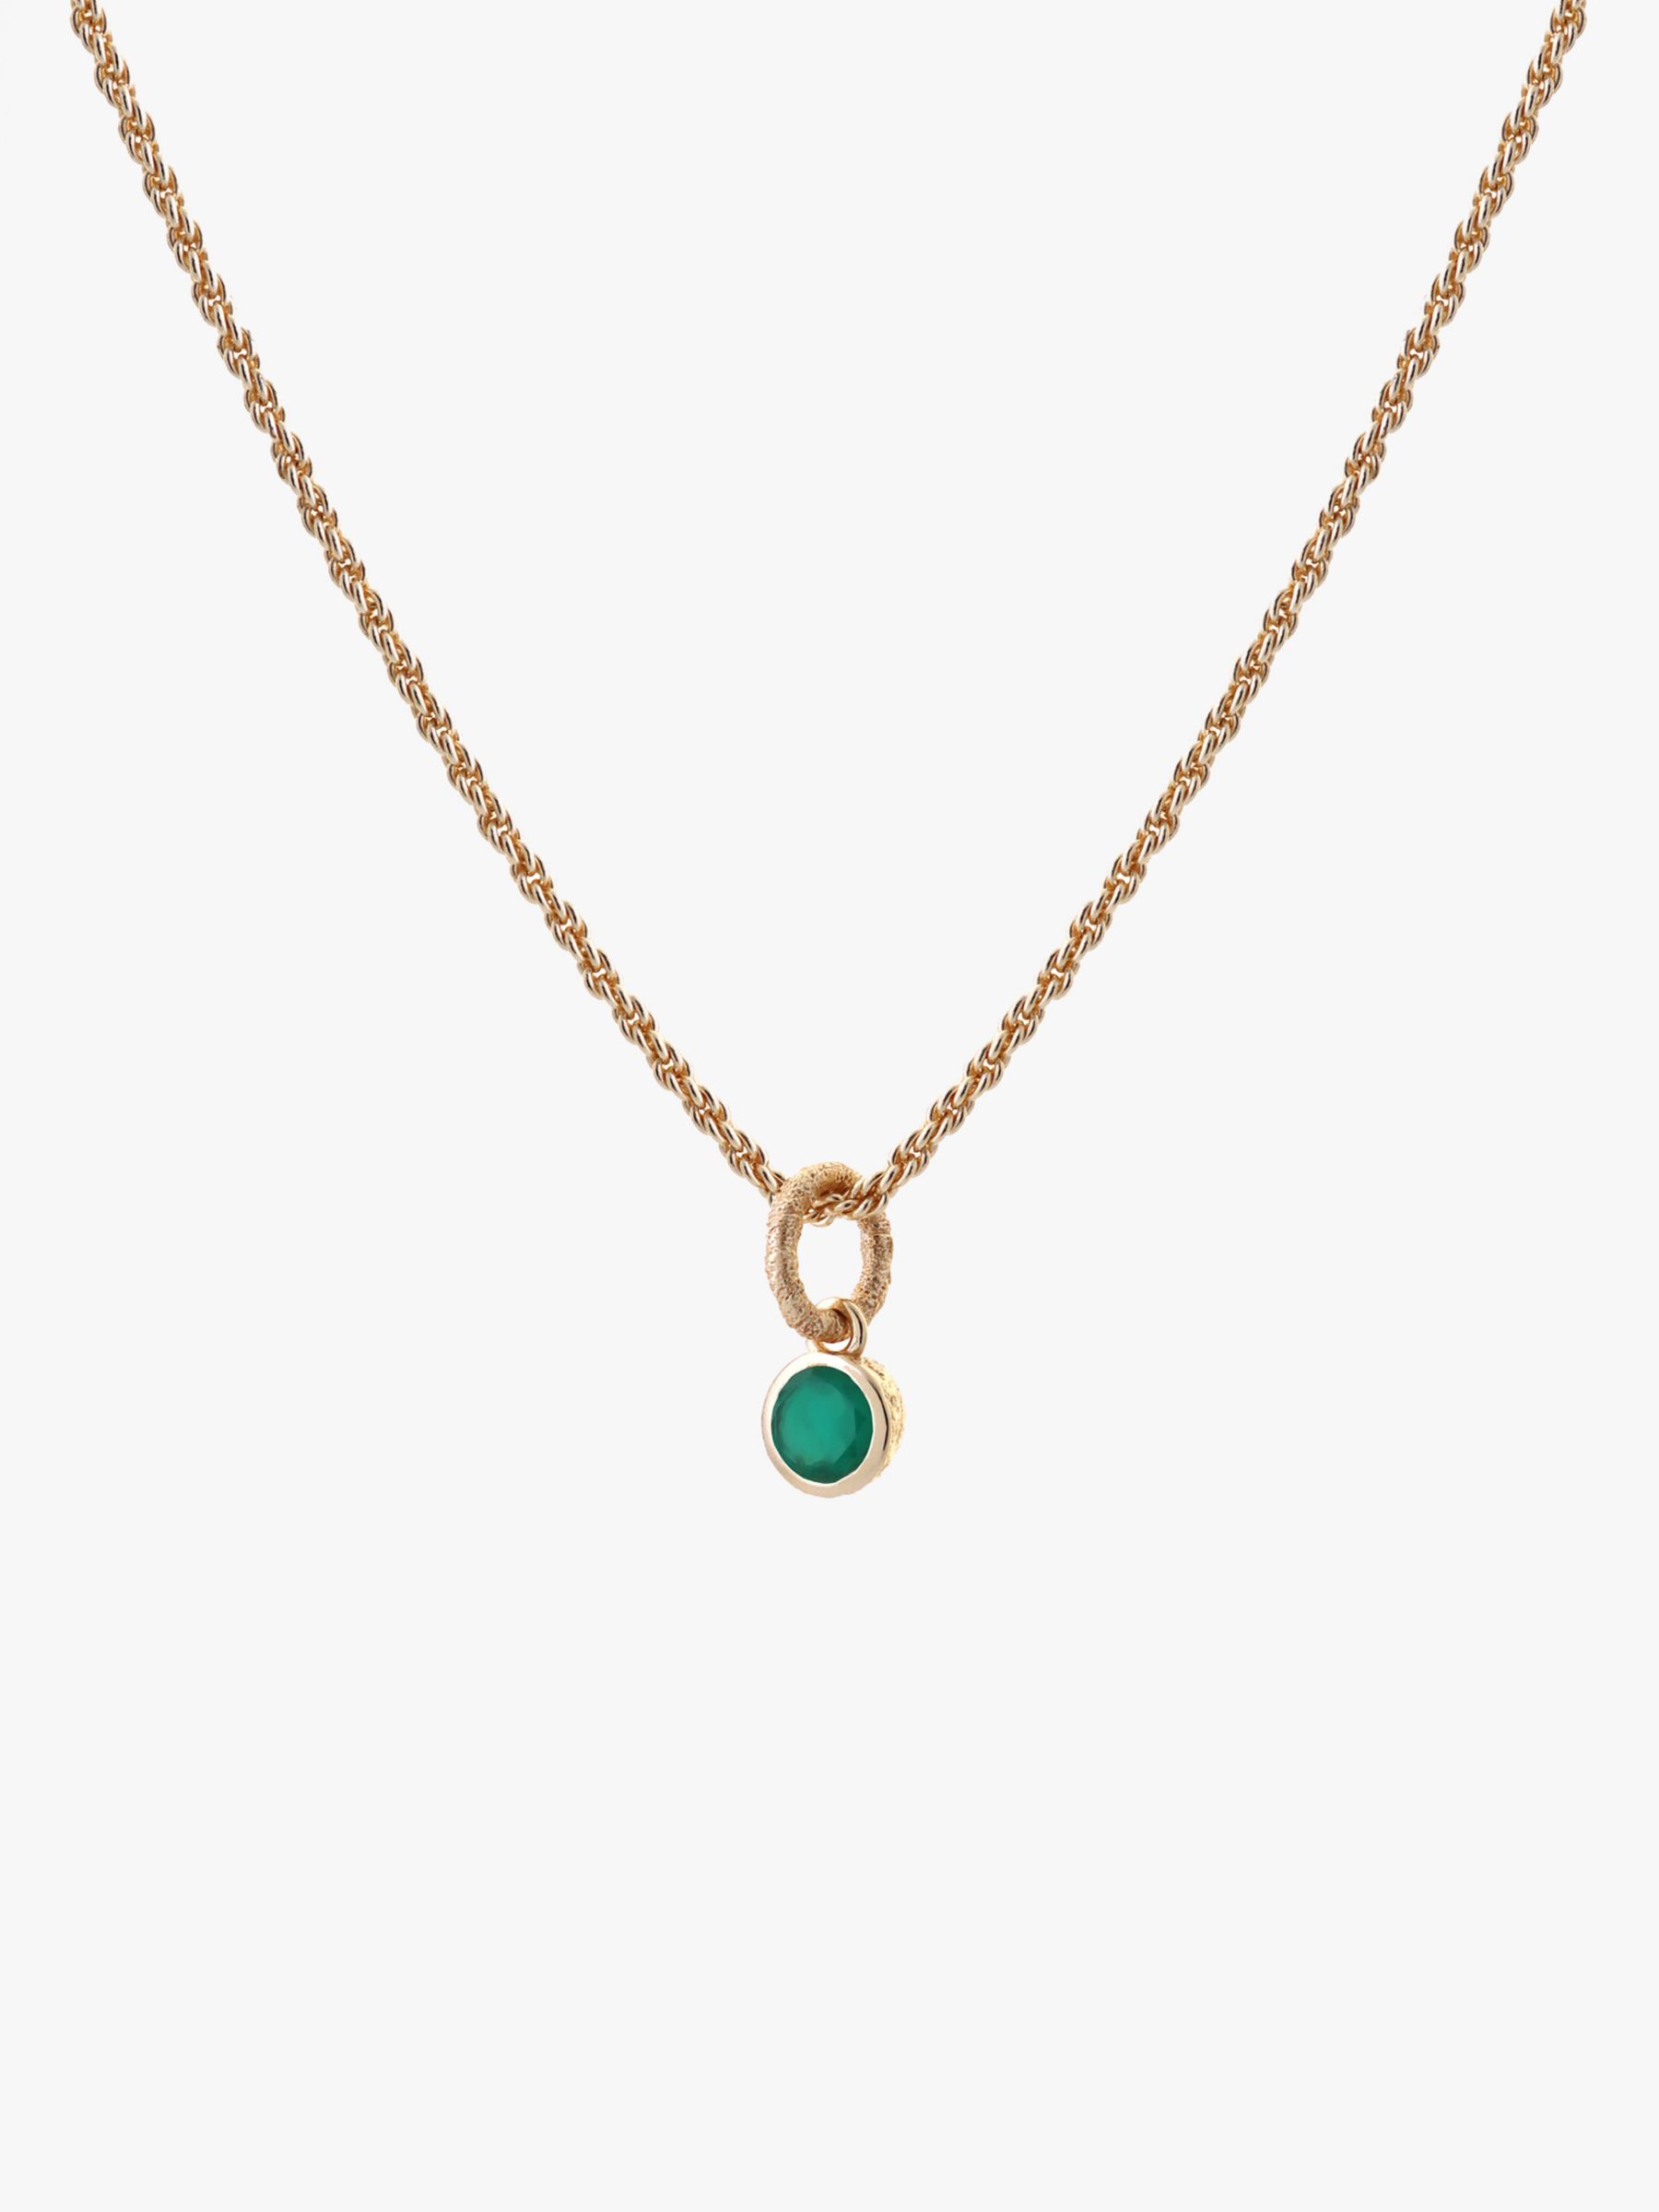 Tutti & Co May Birthstone Necklace, Green Onyx/Gold